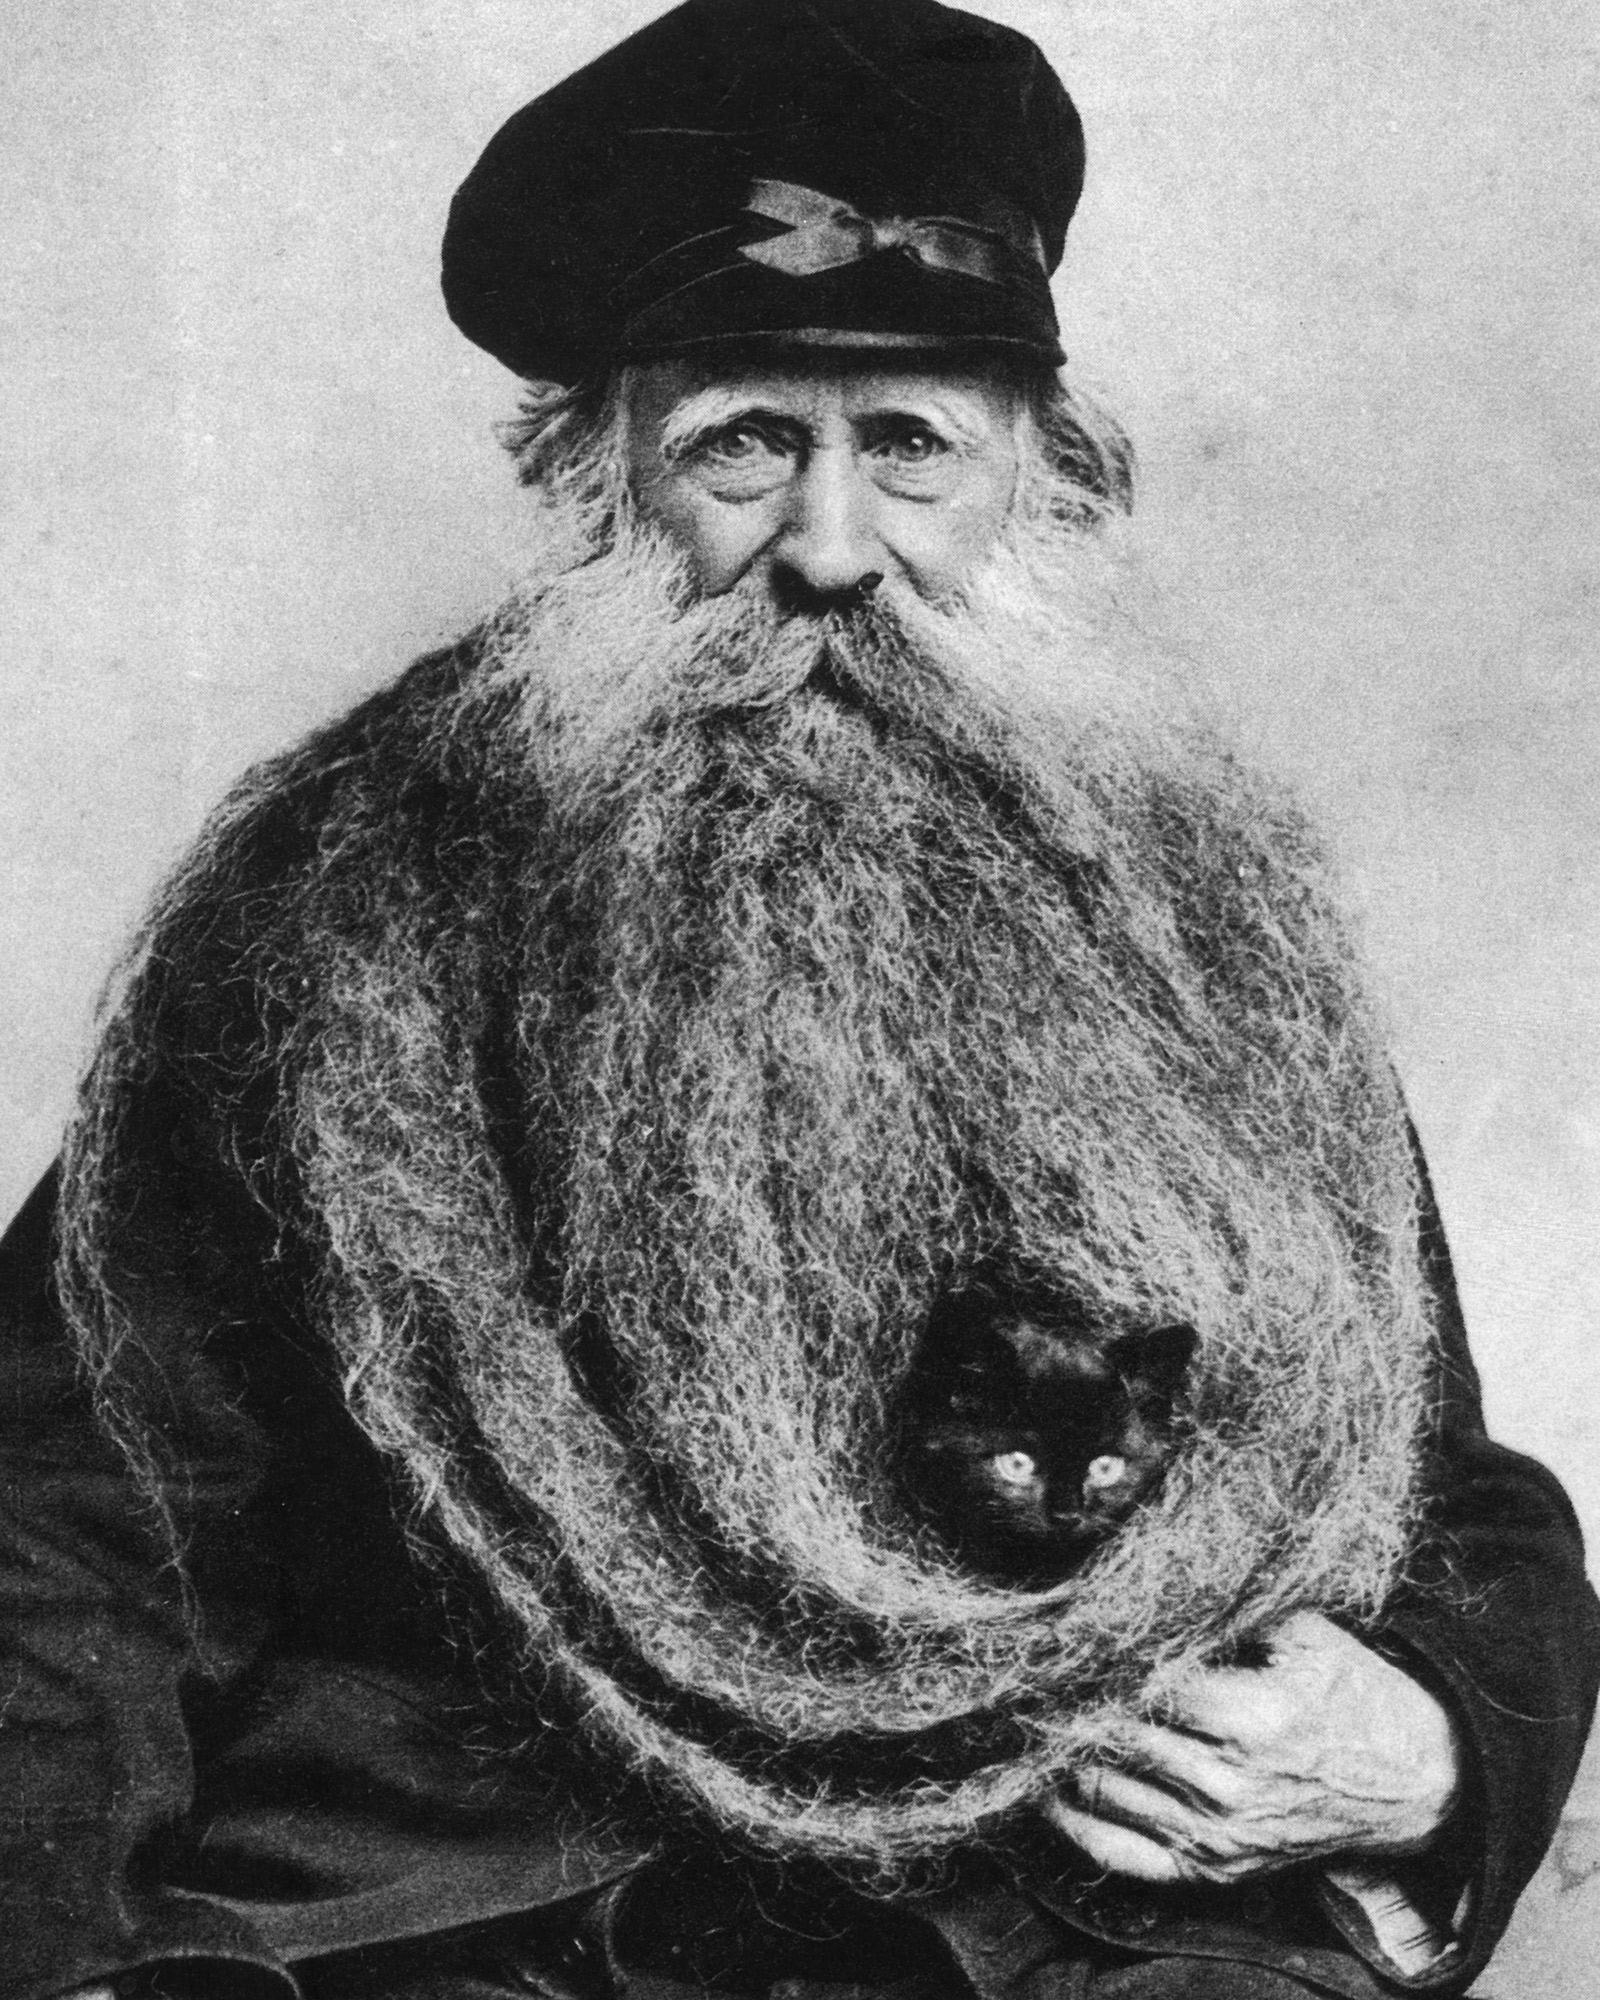 A photograph of French miller Louis Coulon in nineteen oh four, sheltering a kitten in his cozy eleven-foot beard. 